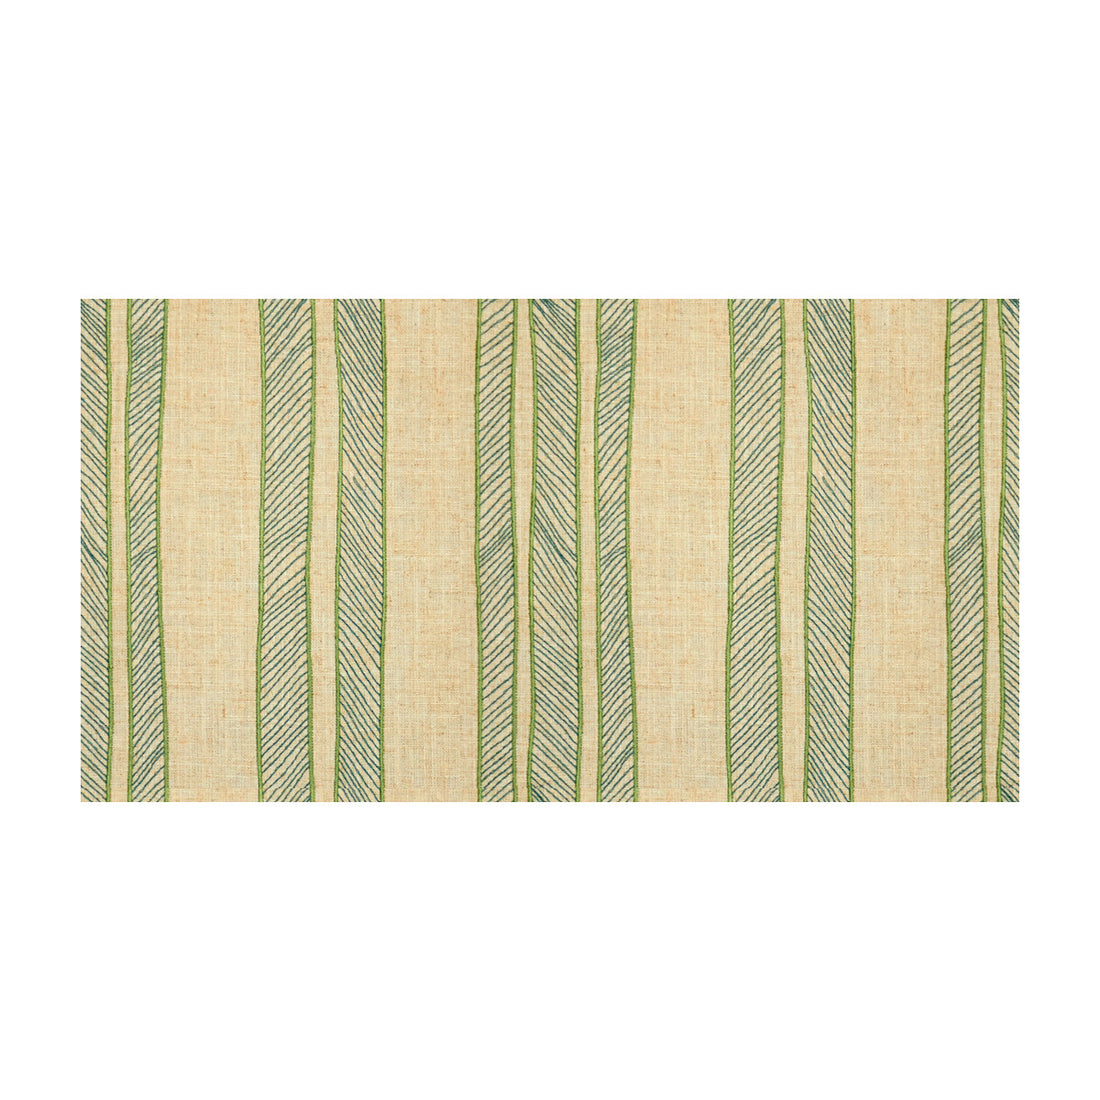 Cords fabric in grass color - pattern 33430.316.0 - by Kravet Basics in the Jeffrey Alan Marks Waterside collection